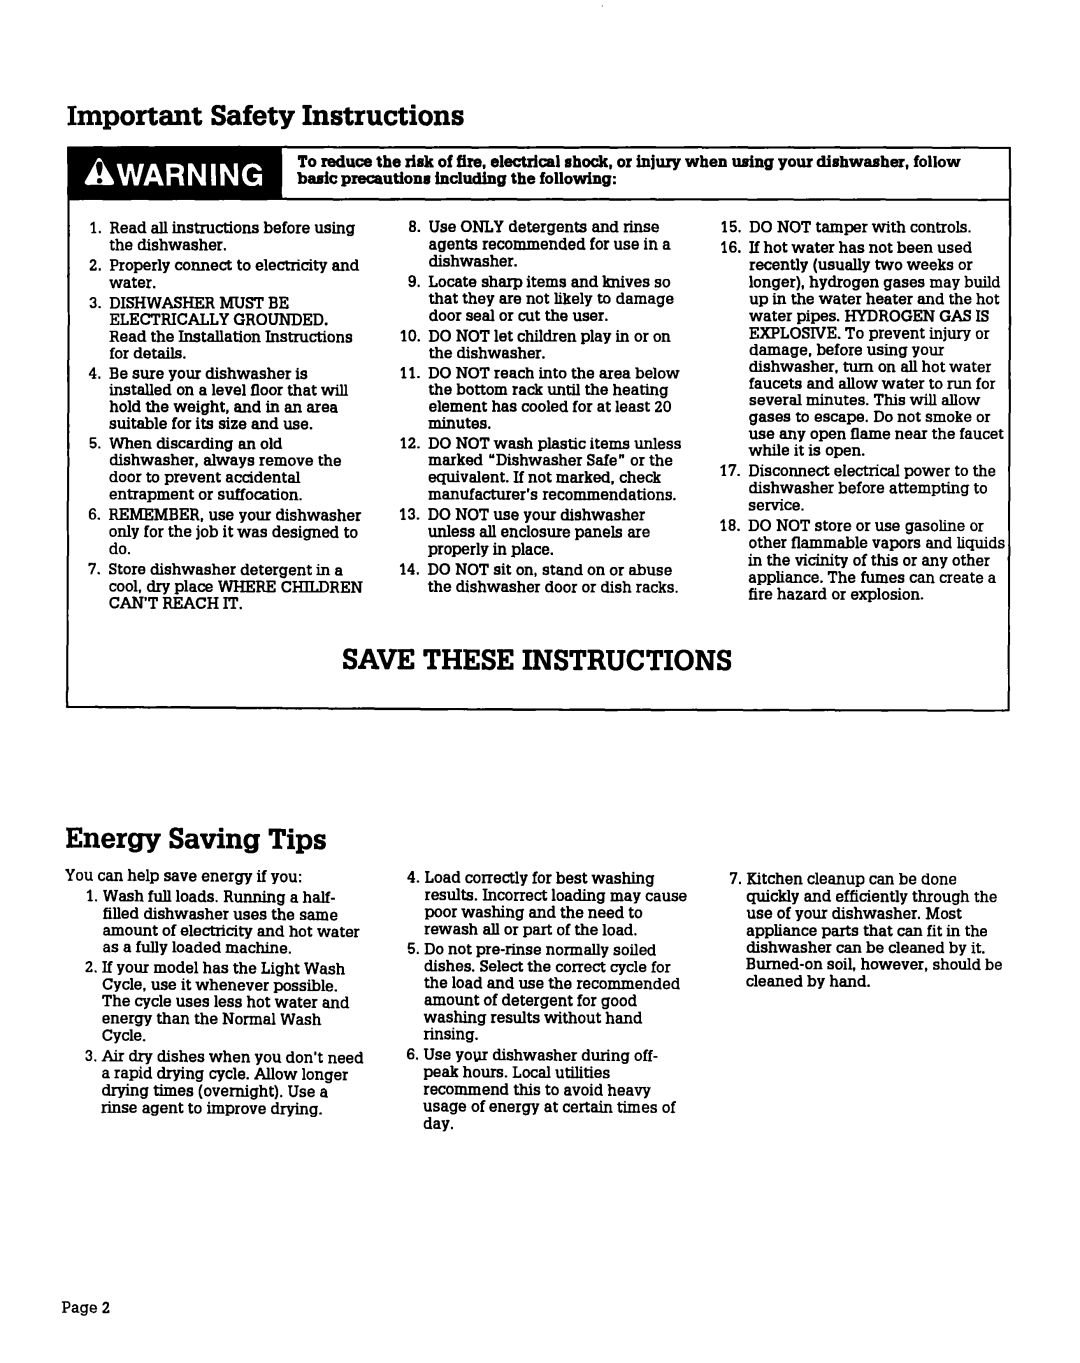 Whirlpool 408 warranty Important Safety Instructions, SAVETHESEINSTRUCTIONS Energy Saving Tips 